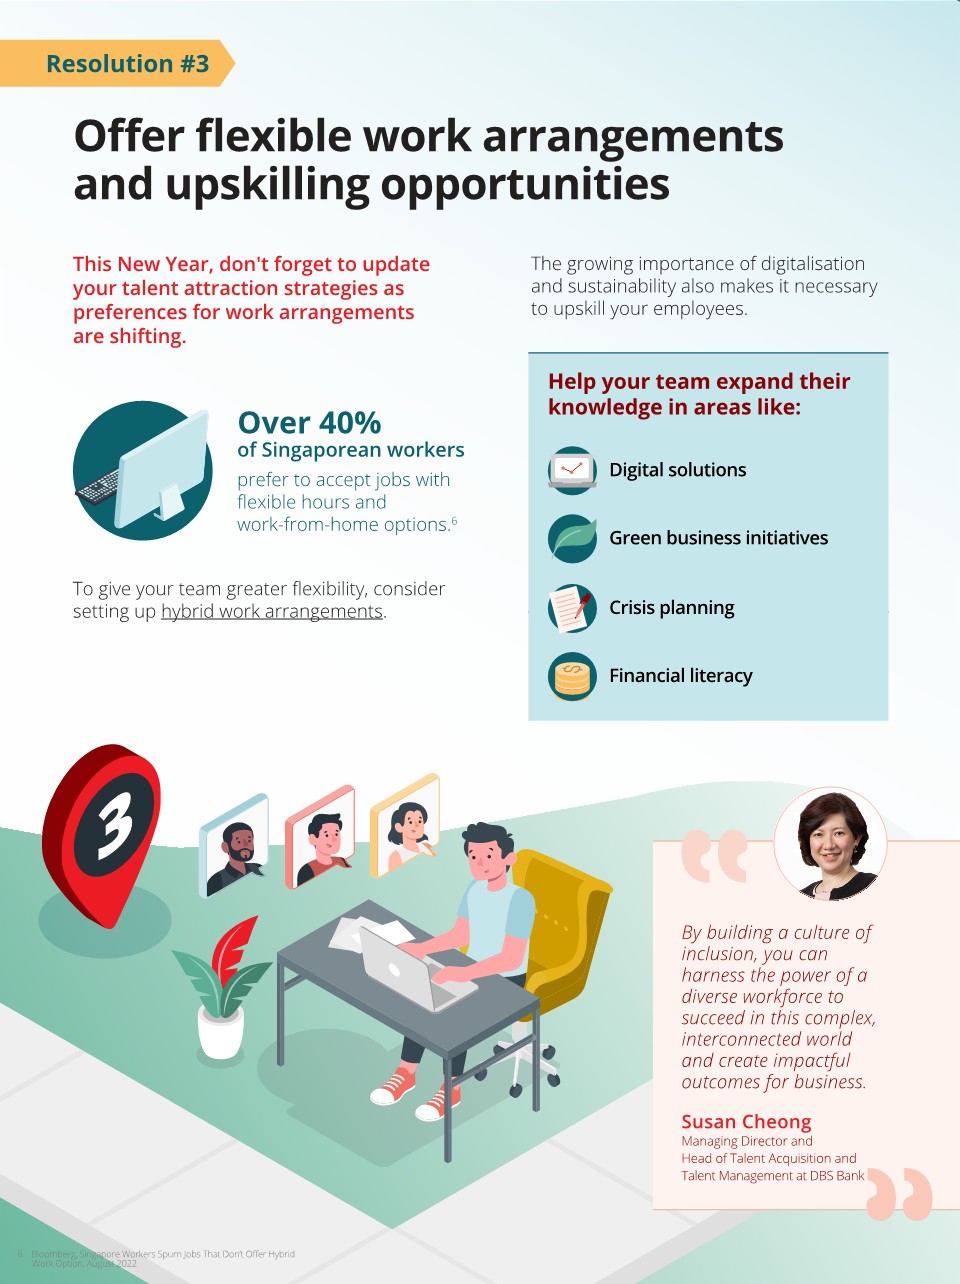 Infographic about upskilling opportunities implementation